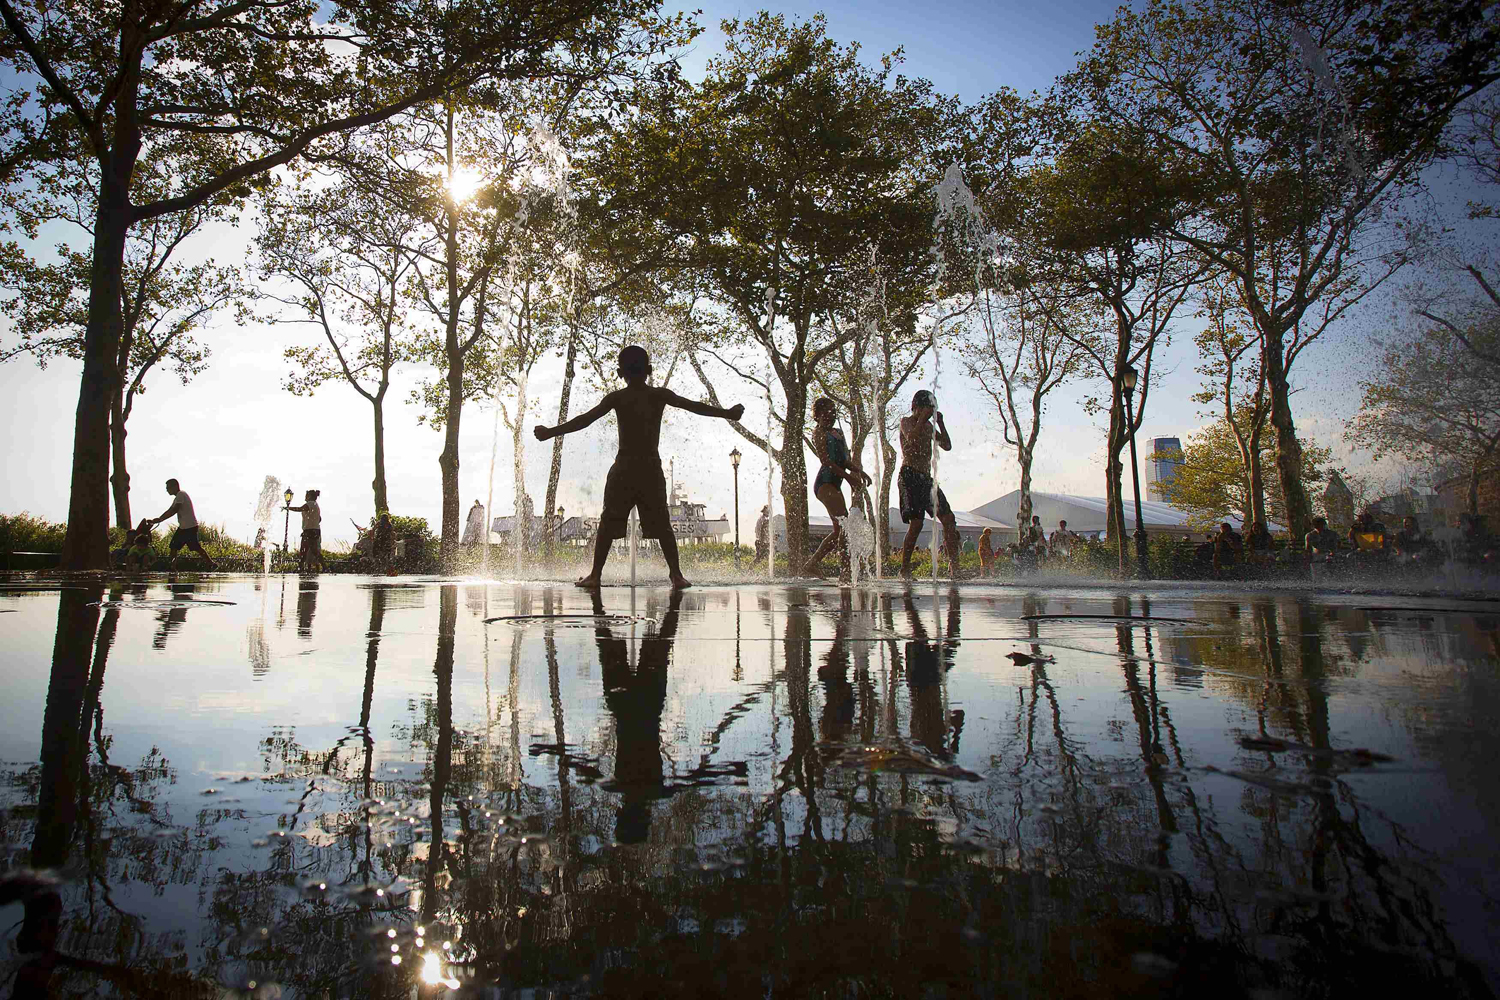 Children play in a fountain in the late afternoon sun in the Lower Manhattan borough of New York City on Aug. 25, 2014.